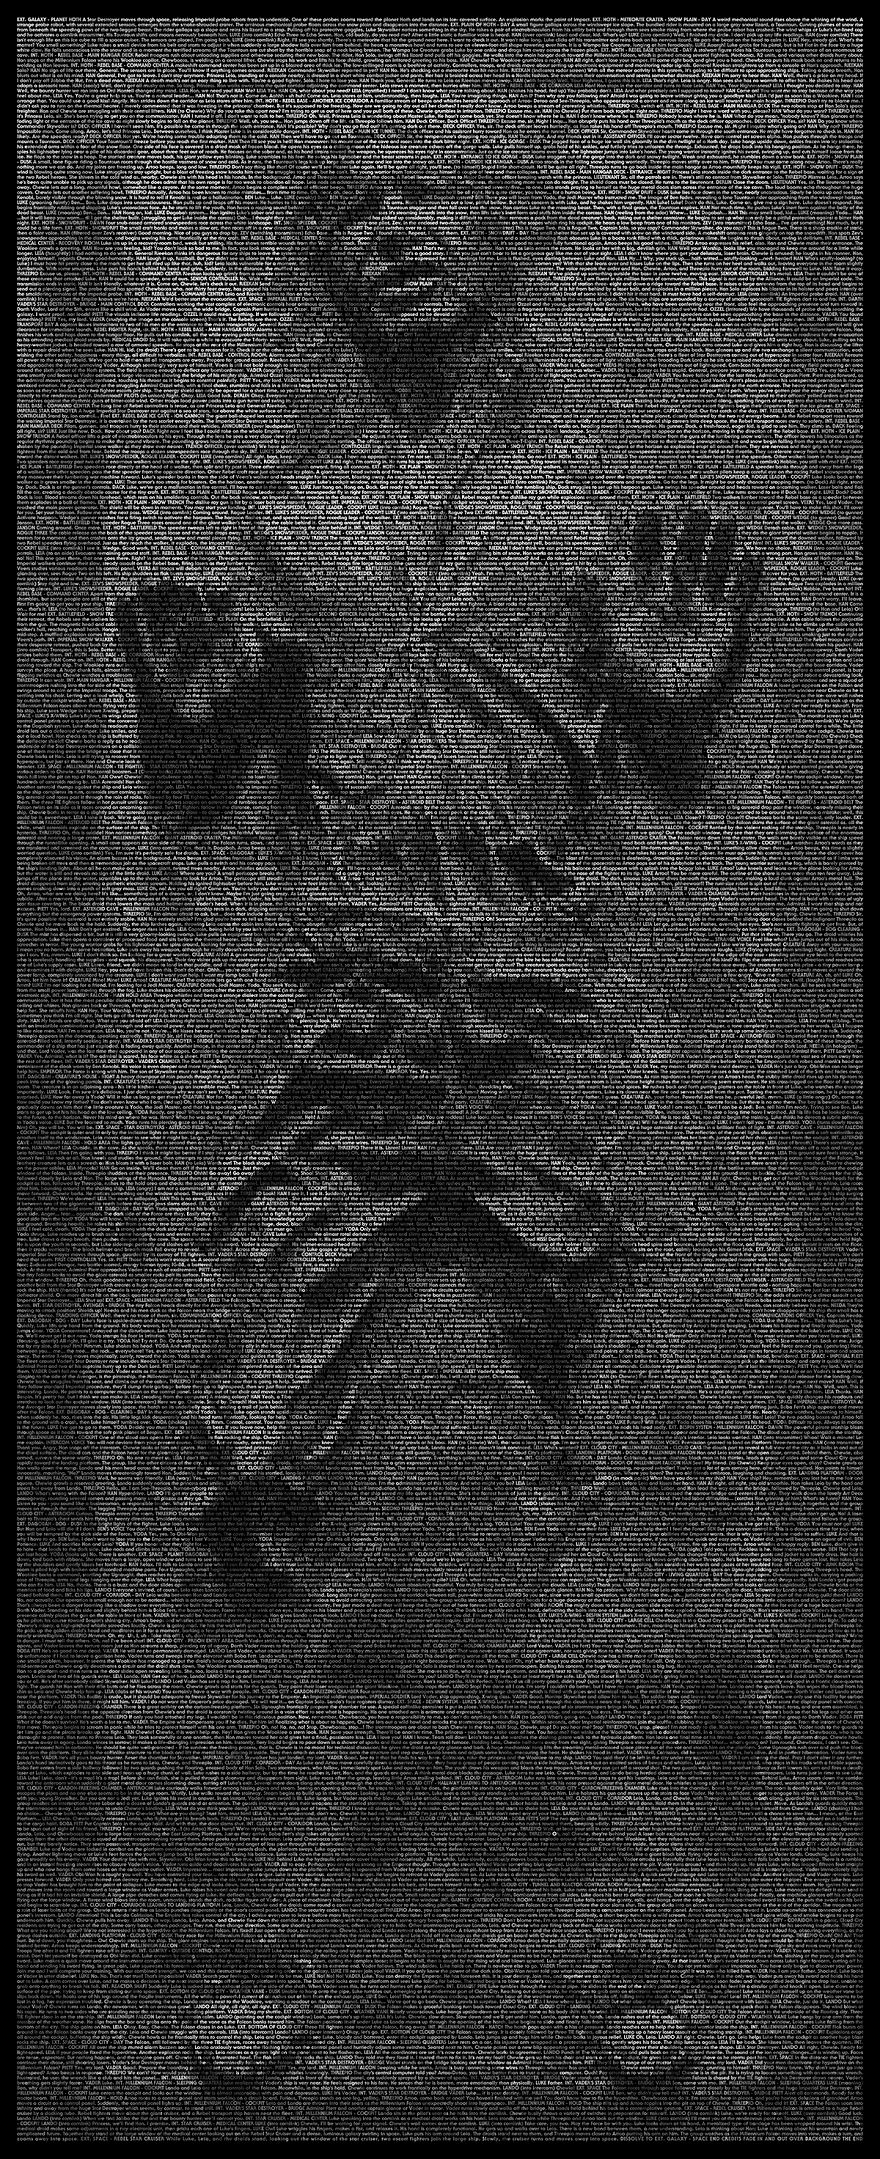 I Used The Empire Strikes Back Script To Create A Typographic Life Sized Han Solo In Carbonite